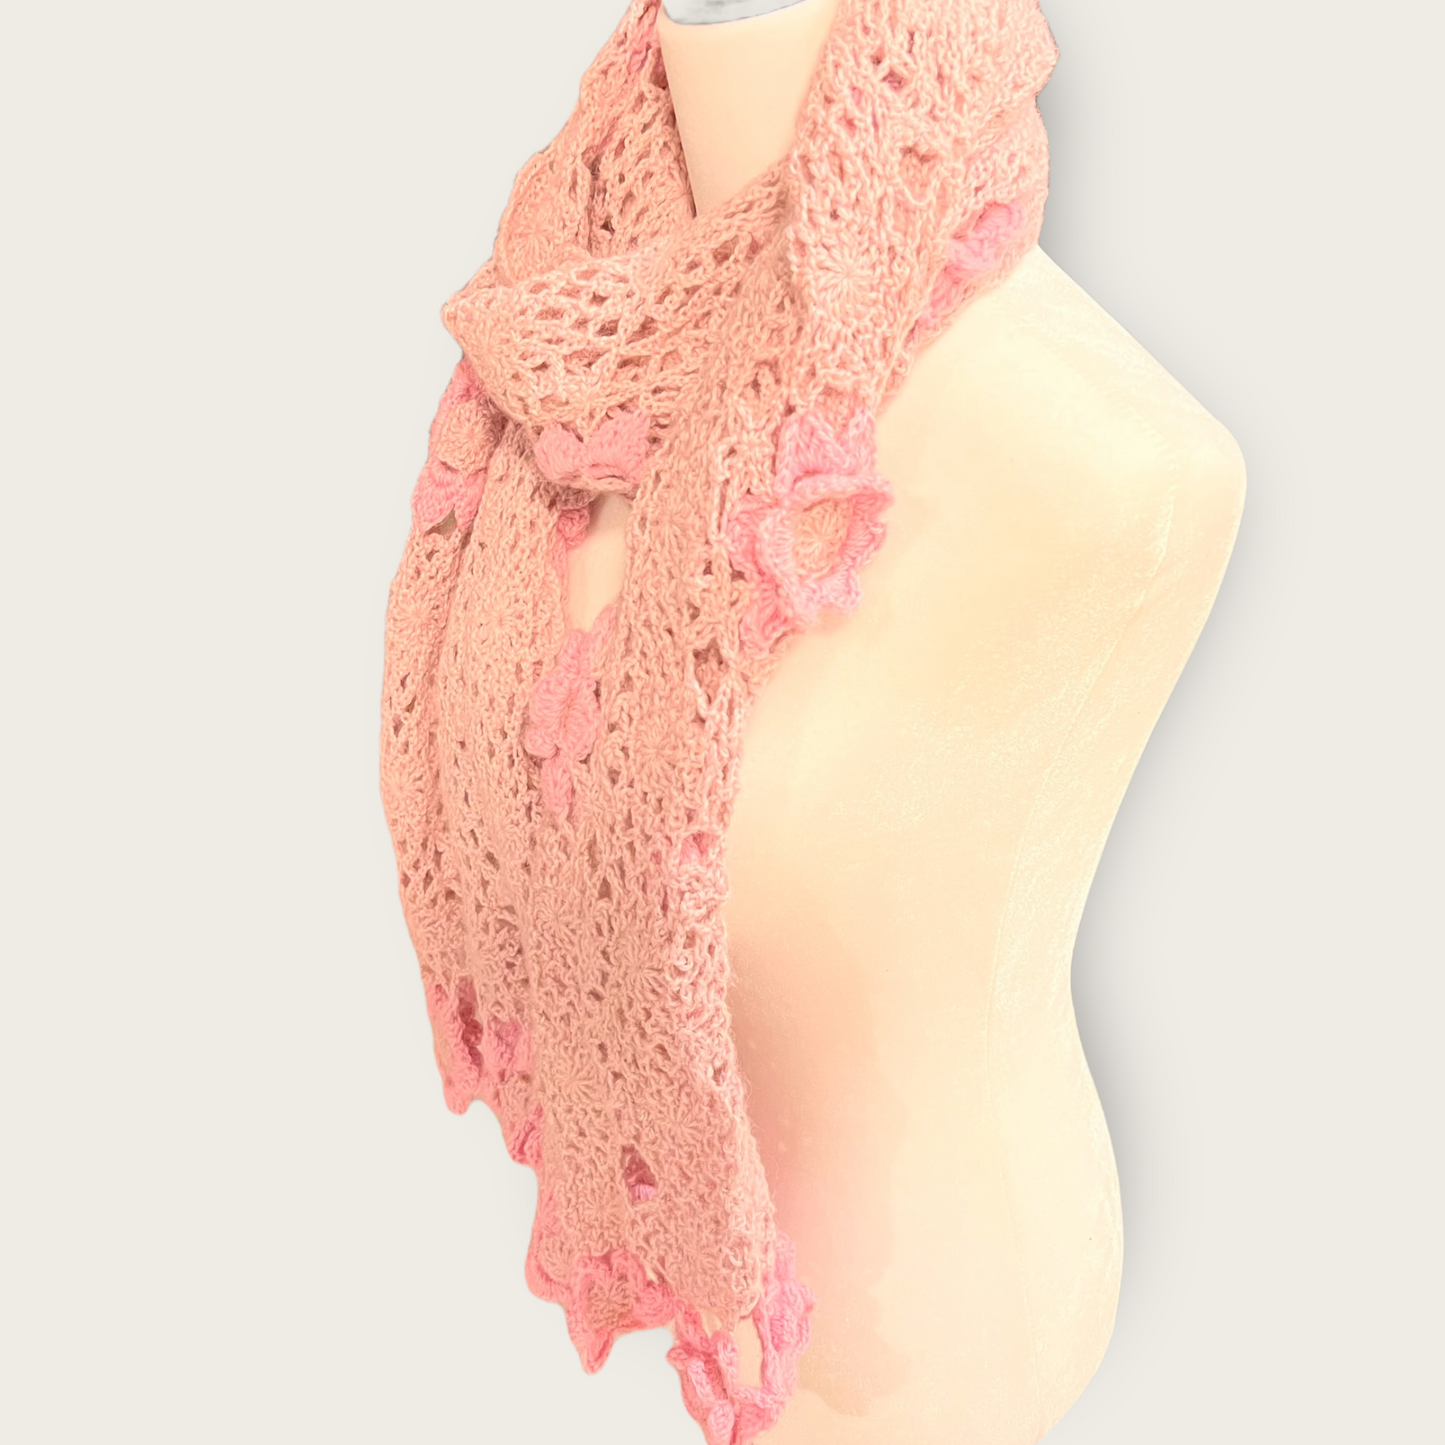 The Pink Roses Scarf